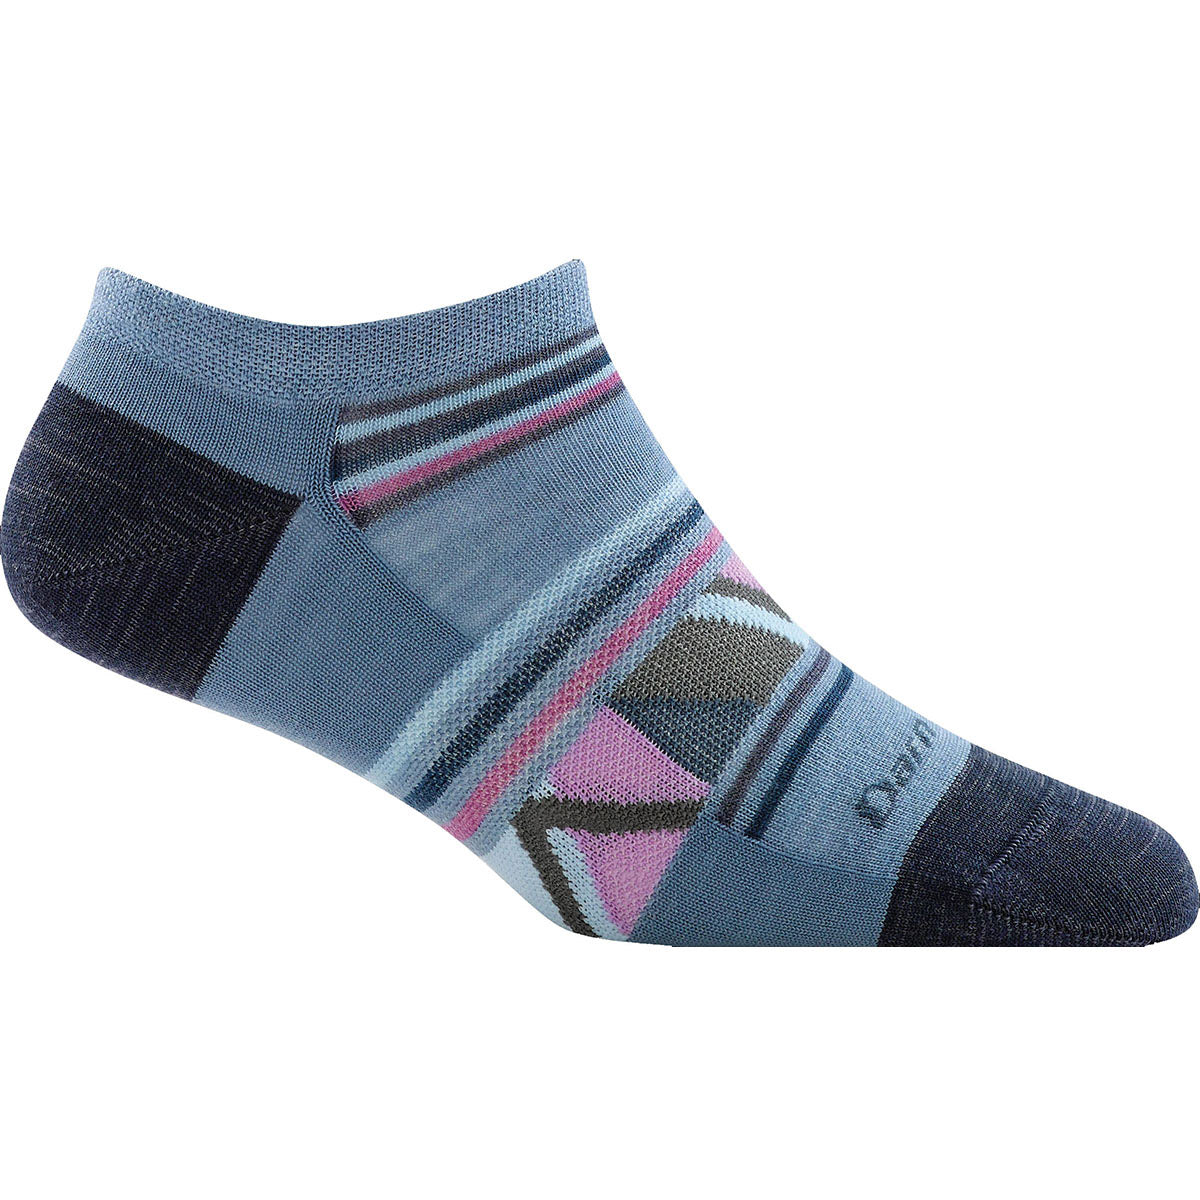 A single Darn Tough Bridge No Show Blue low-cut athletic sock with a blue and pink geometric pattern, made from fast action wicking merino wool.